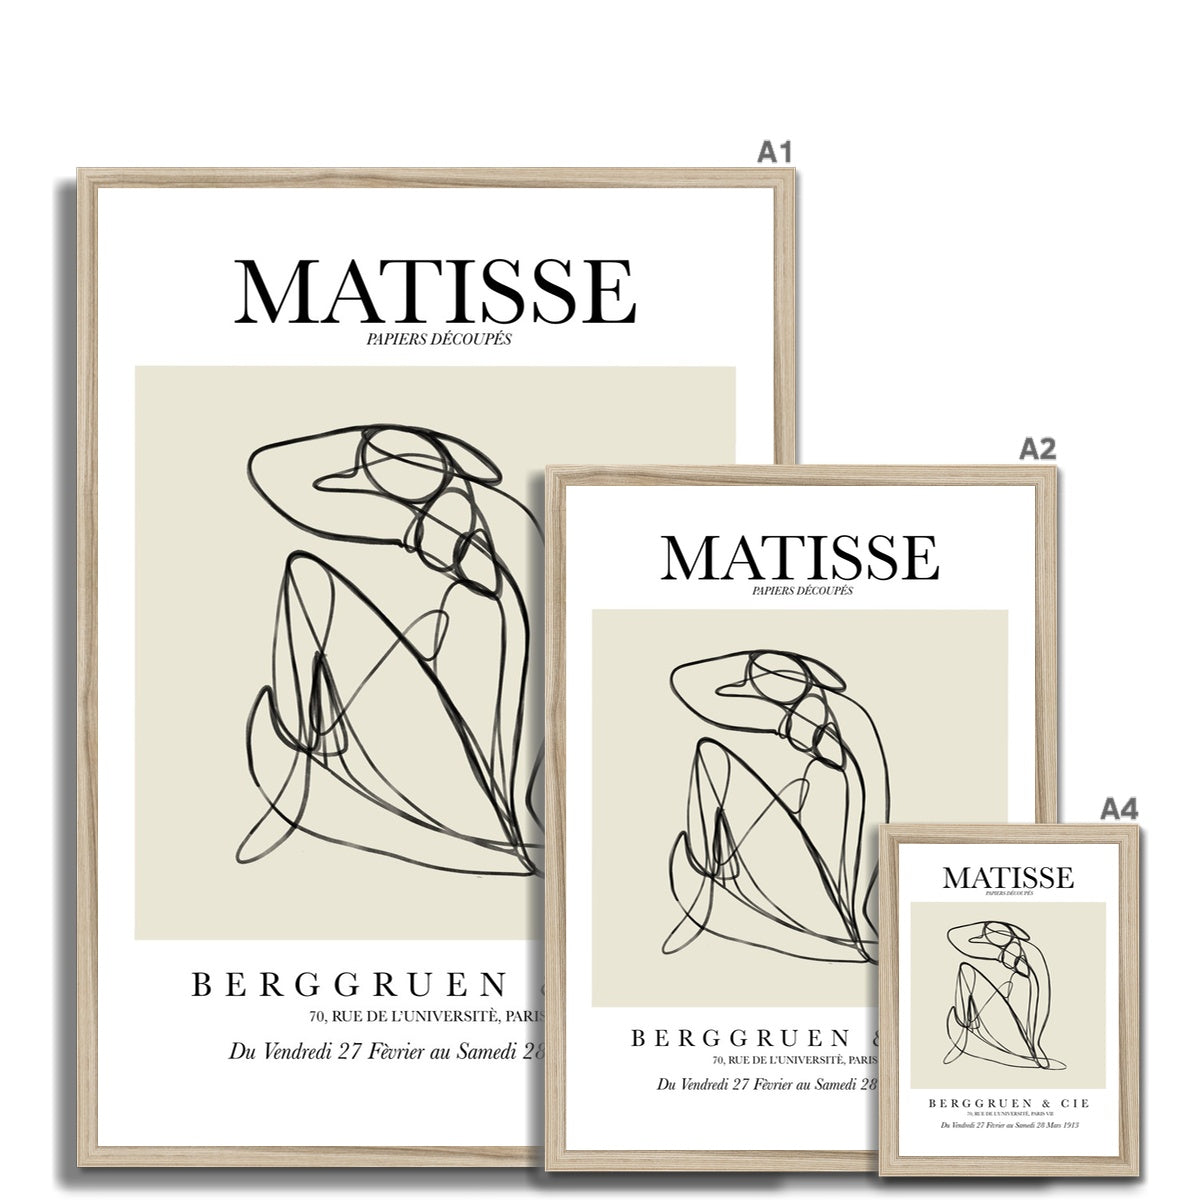 © les muses / Matisse wall art prints featuring nude figure line art or "Papiers Découpés" in a danish pastel style. Matisse exhibition posters with line art figures. Berggruen & Cie museum prints for your gallery wall. 